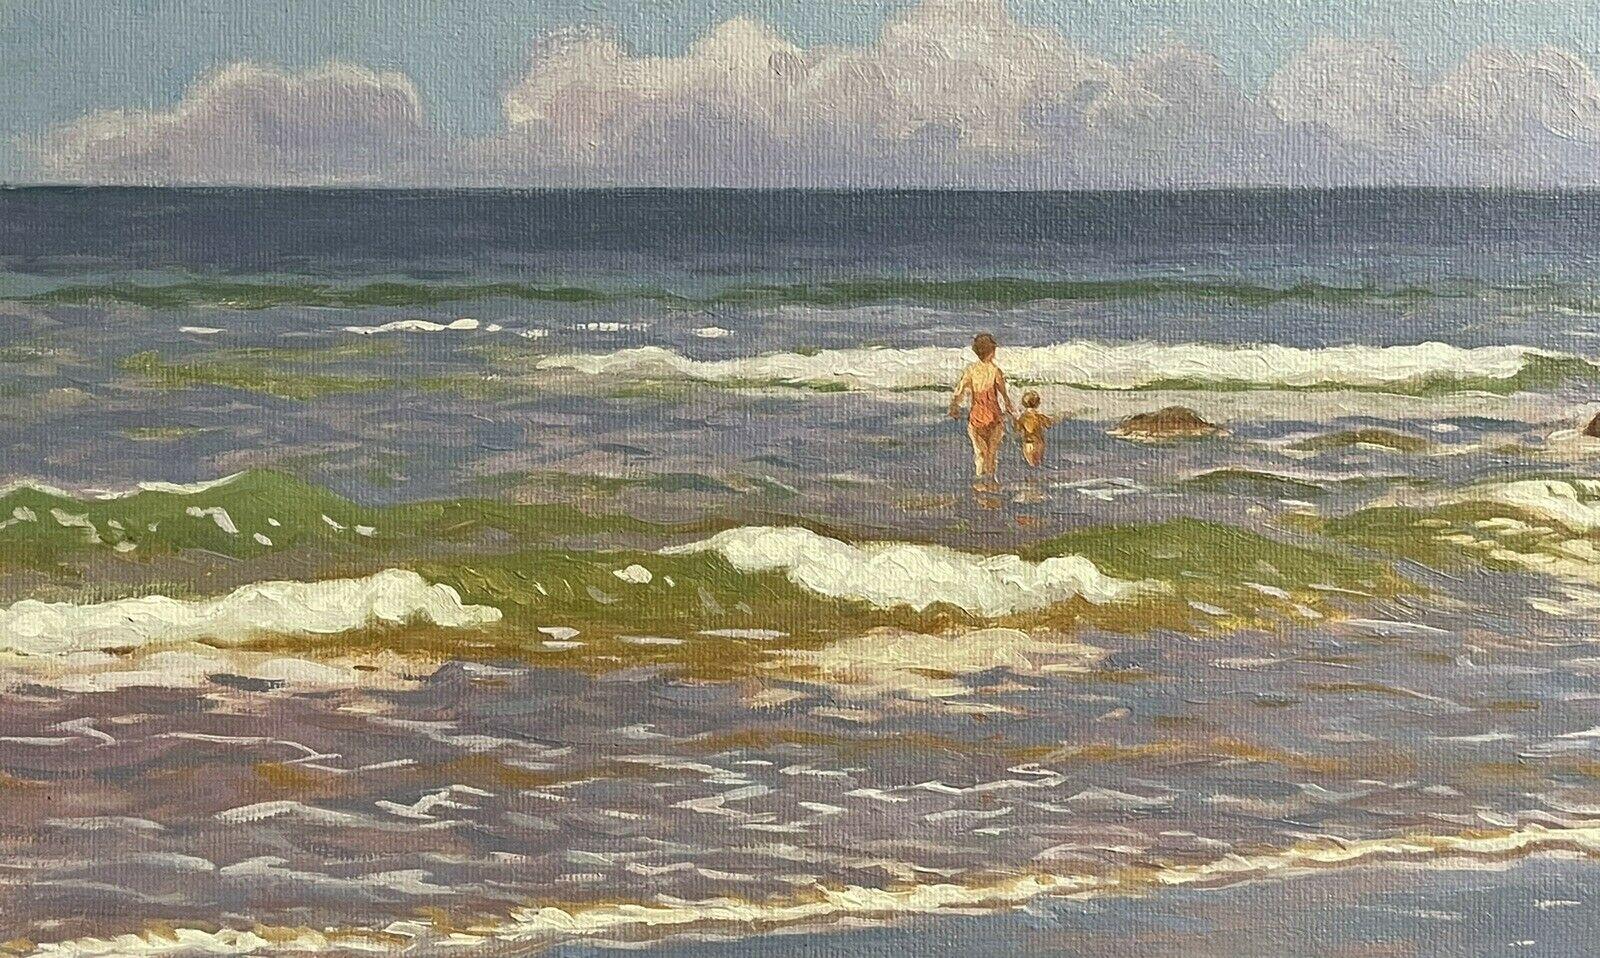 FINE MODERN BRITISH SIGNED OIL PAINTING - CHILDREN PLAYING IN SURF ON BEACH - Impressionist Painting by M. Clark